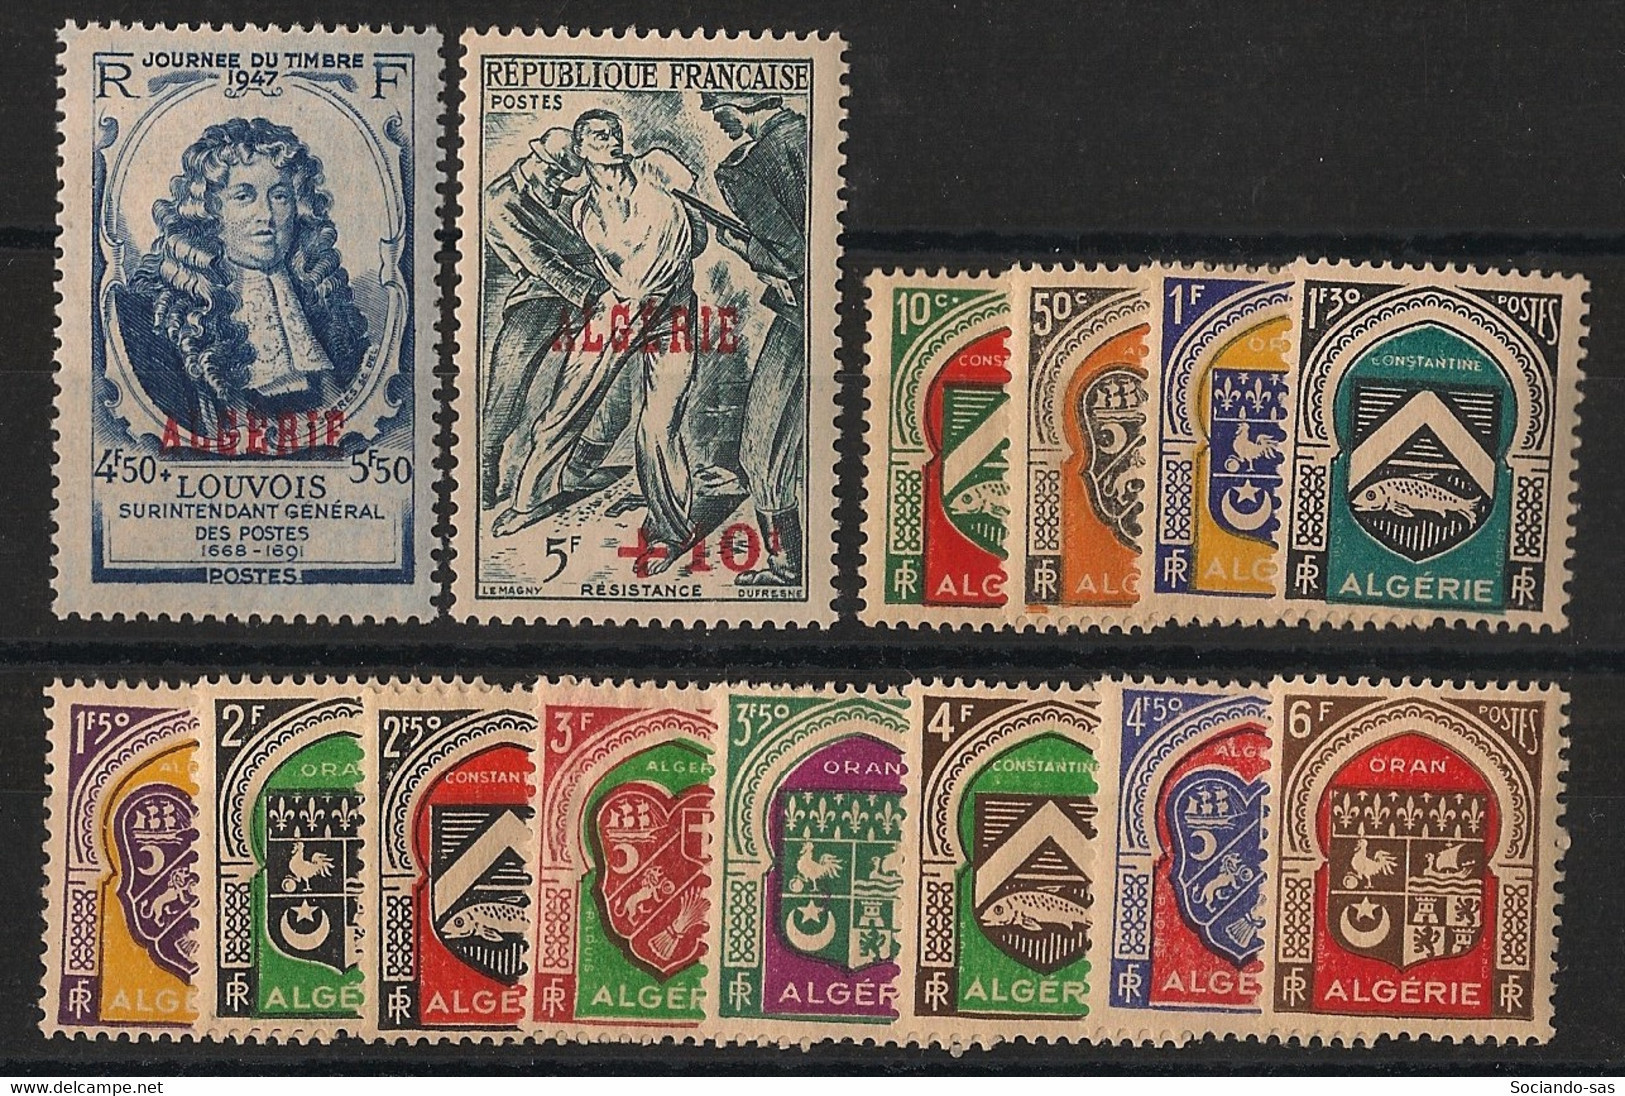 ALGERIE - Année Complète 1947 - N°YT. 253 à 266 - Complet - 14 Valeurs - Neuf Luxe ** / MNH / Postfrisch - Full Years